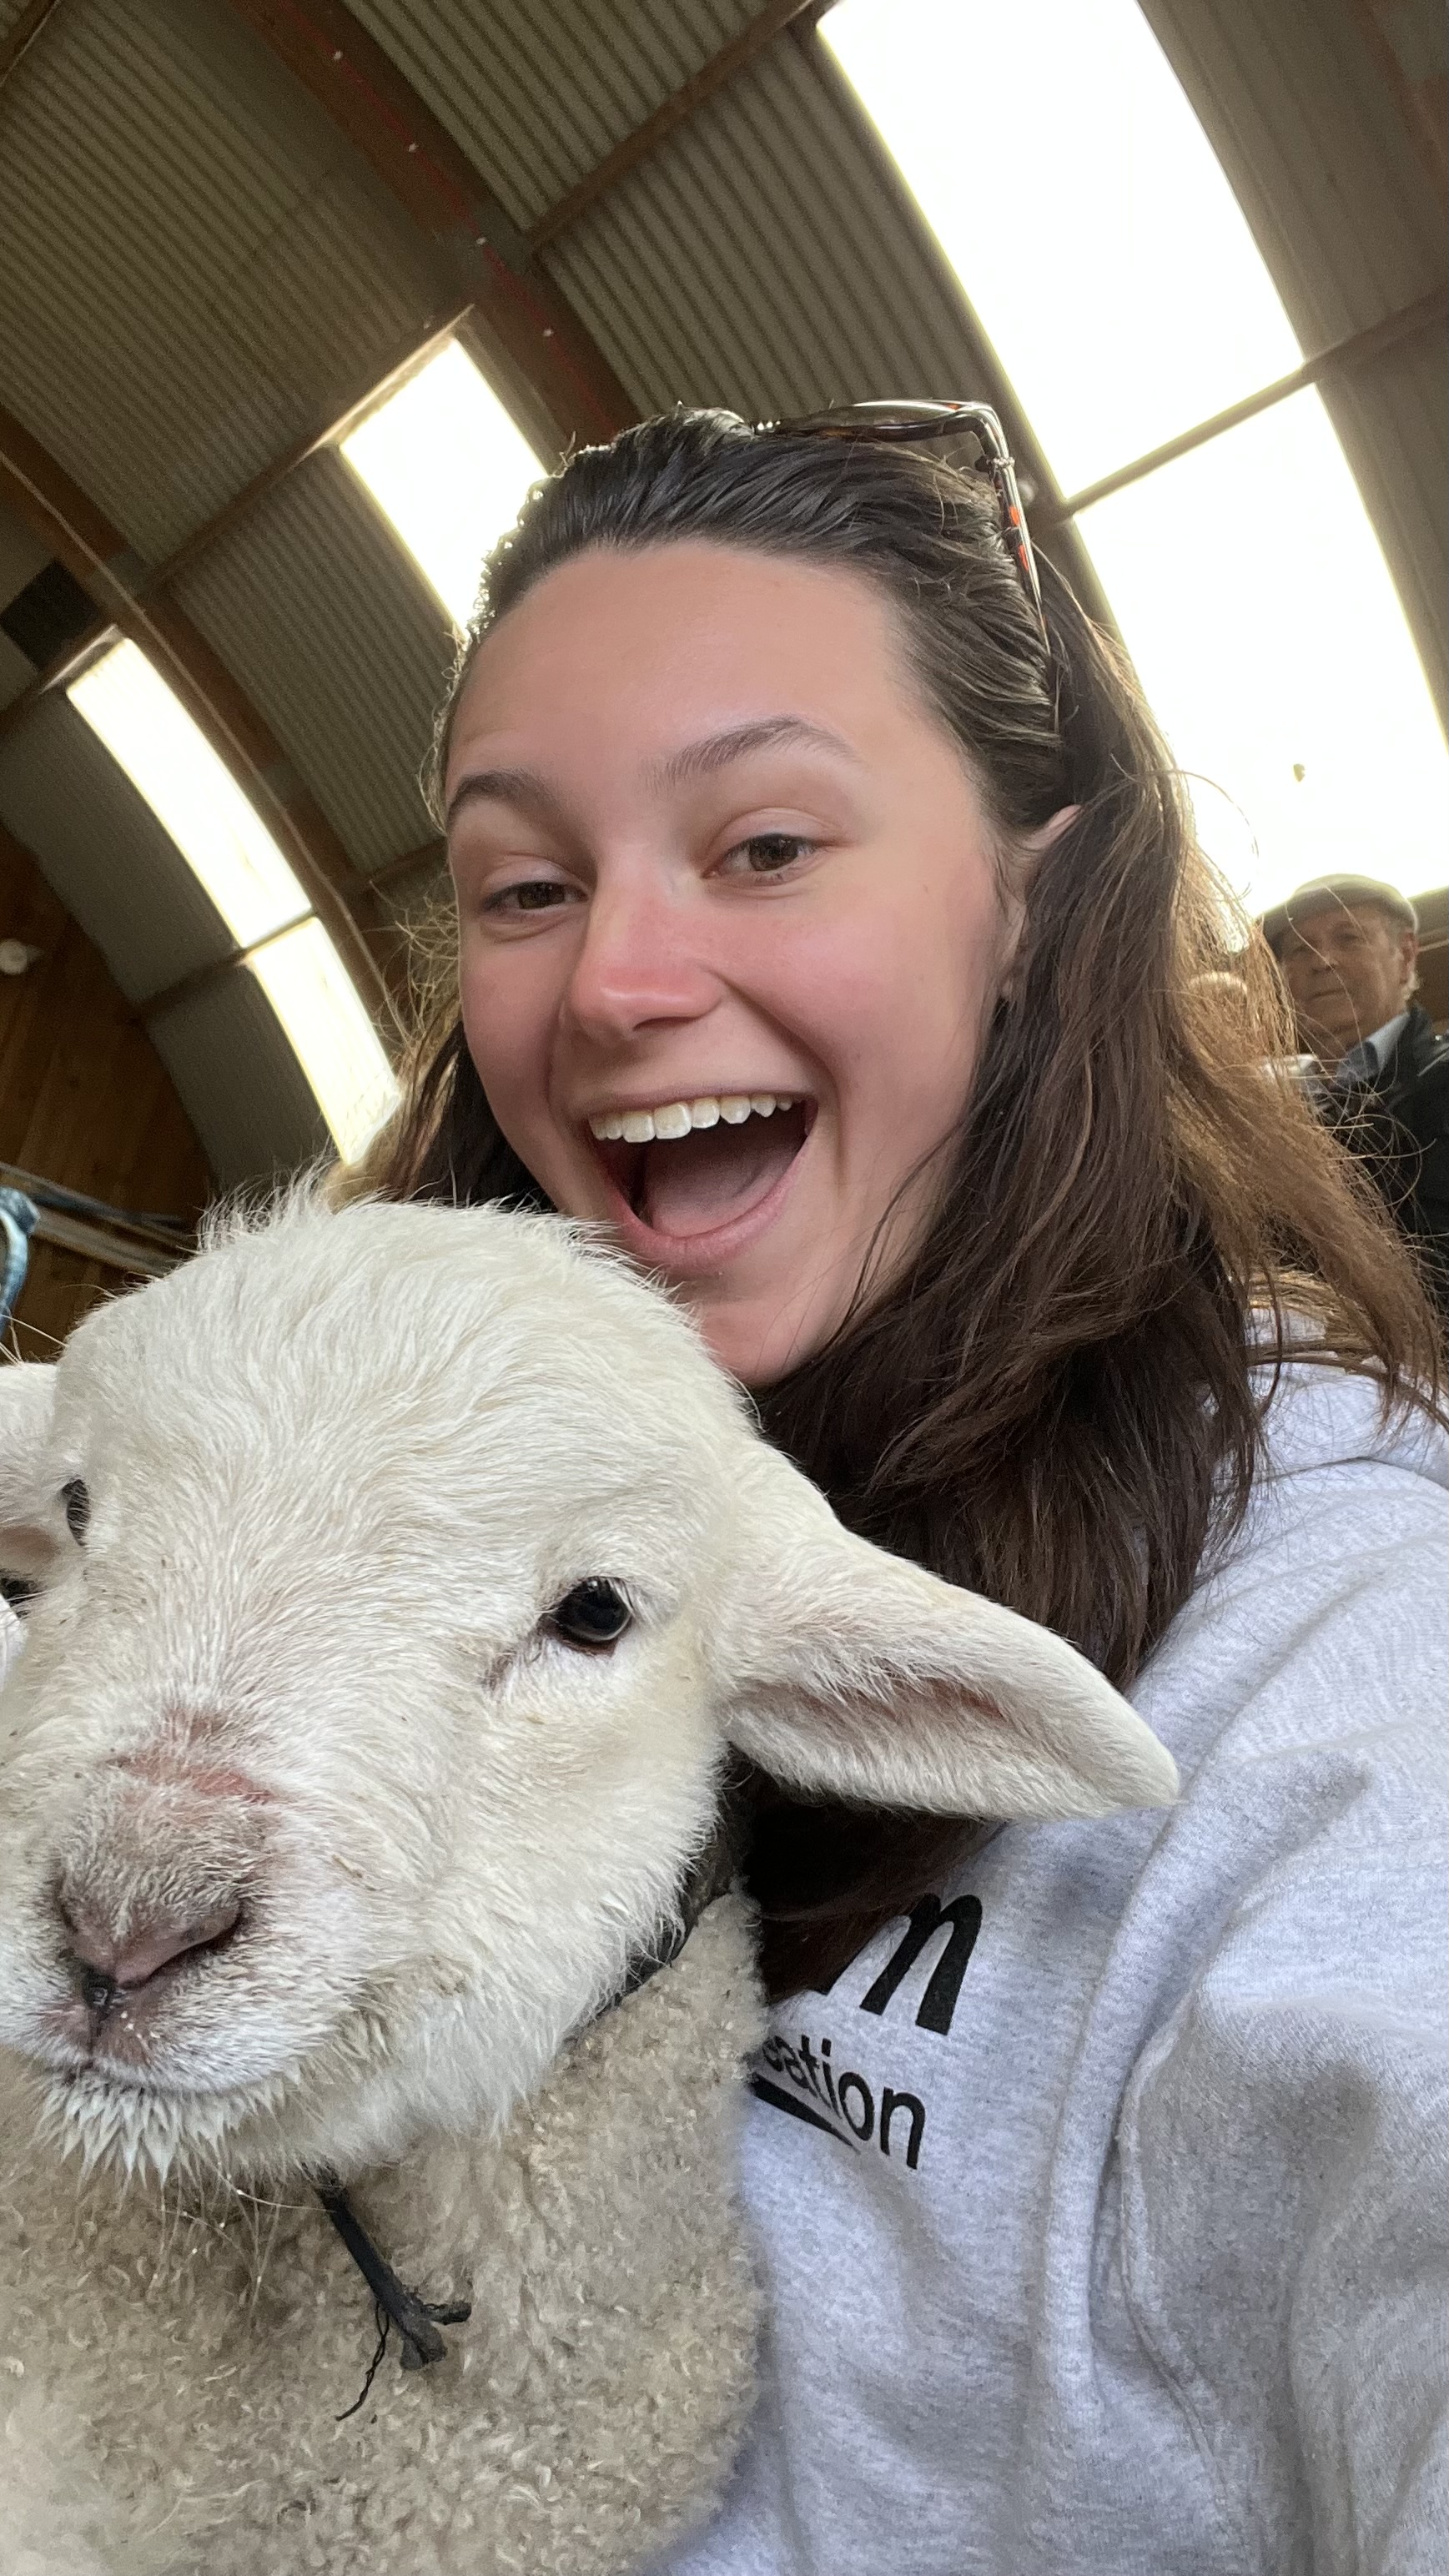 selfie with a sheep